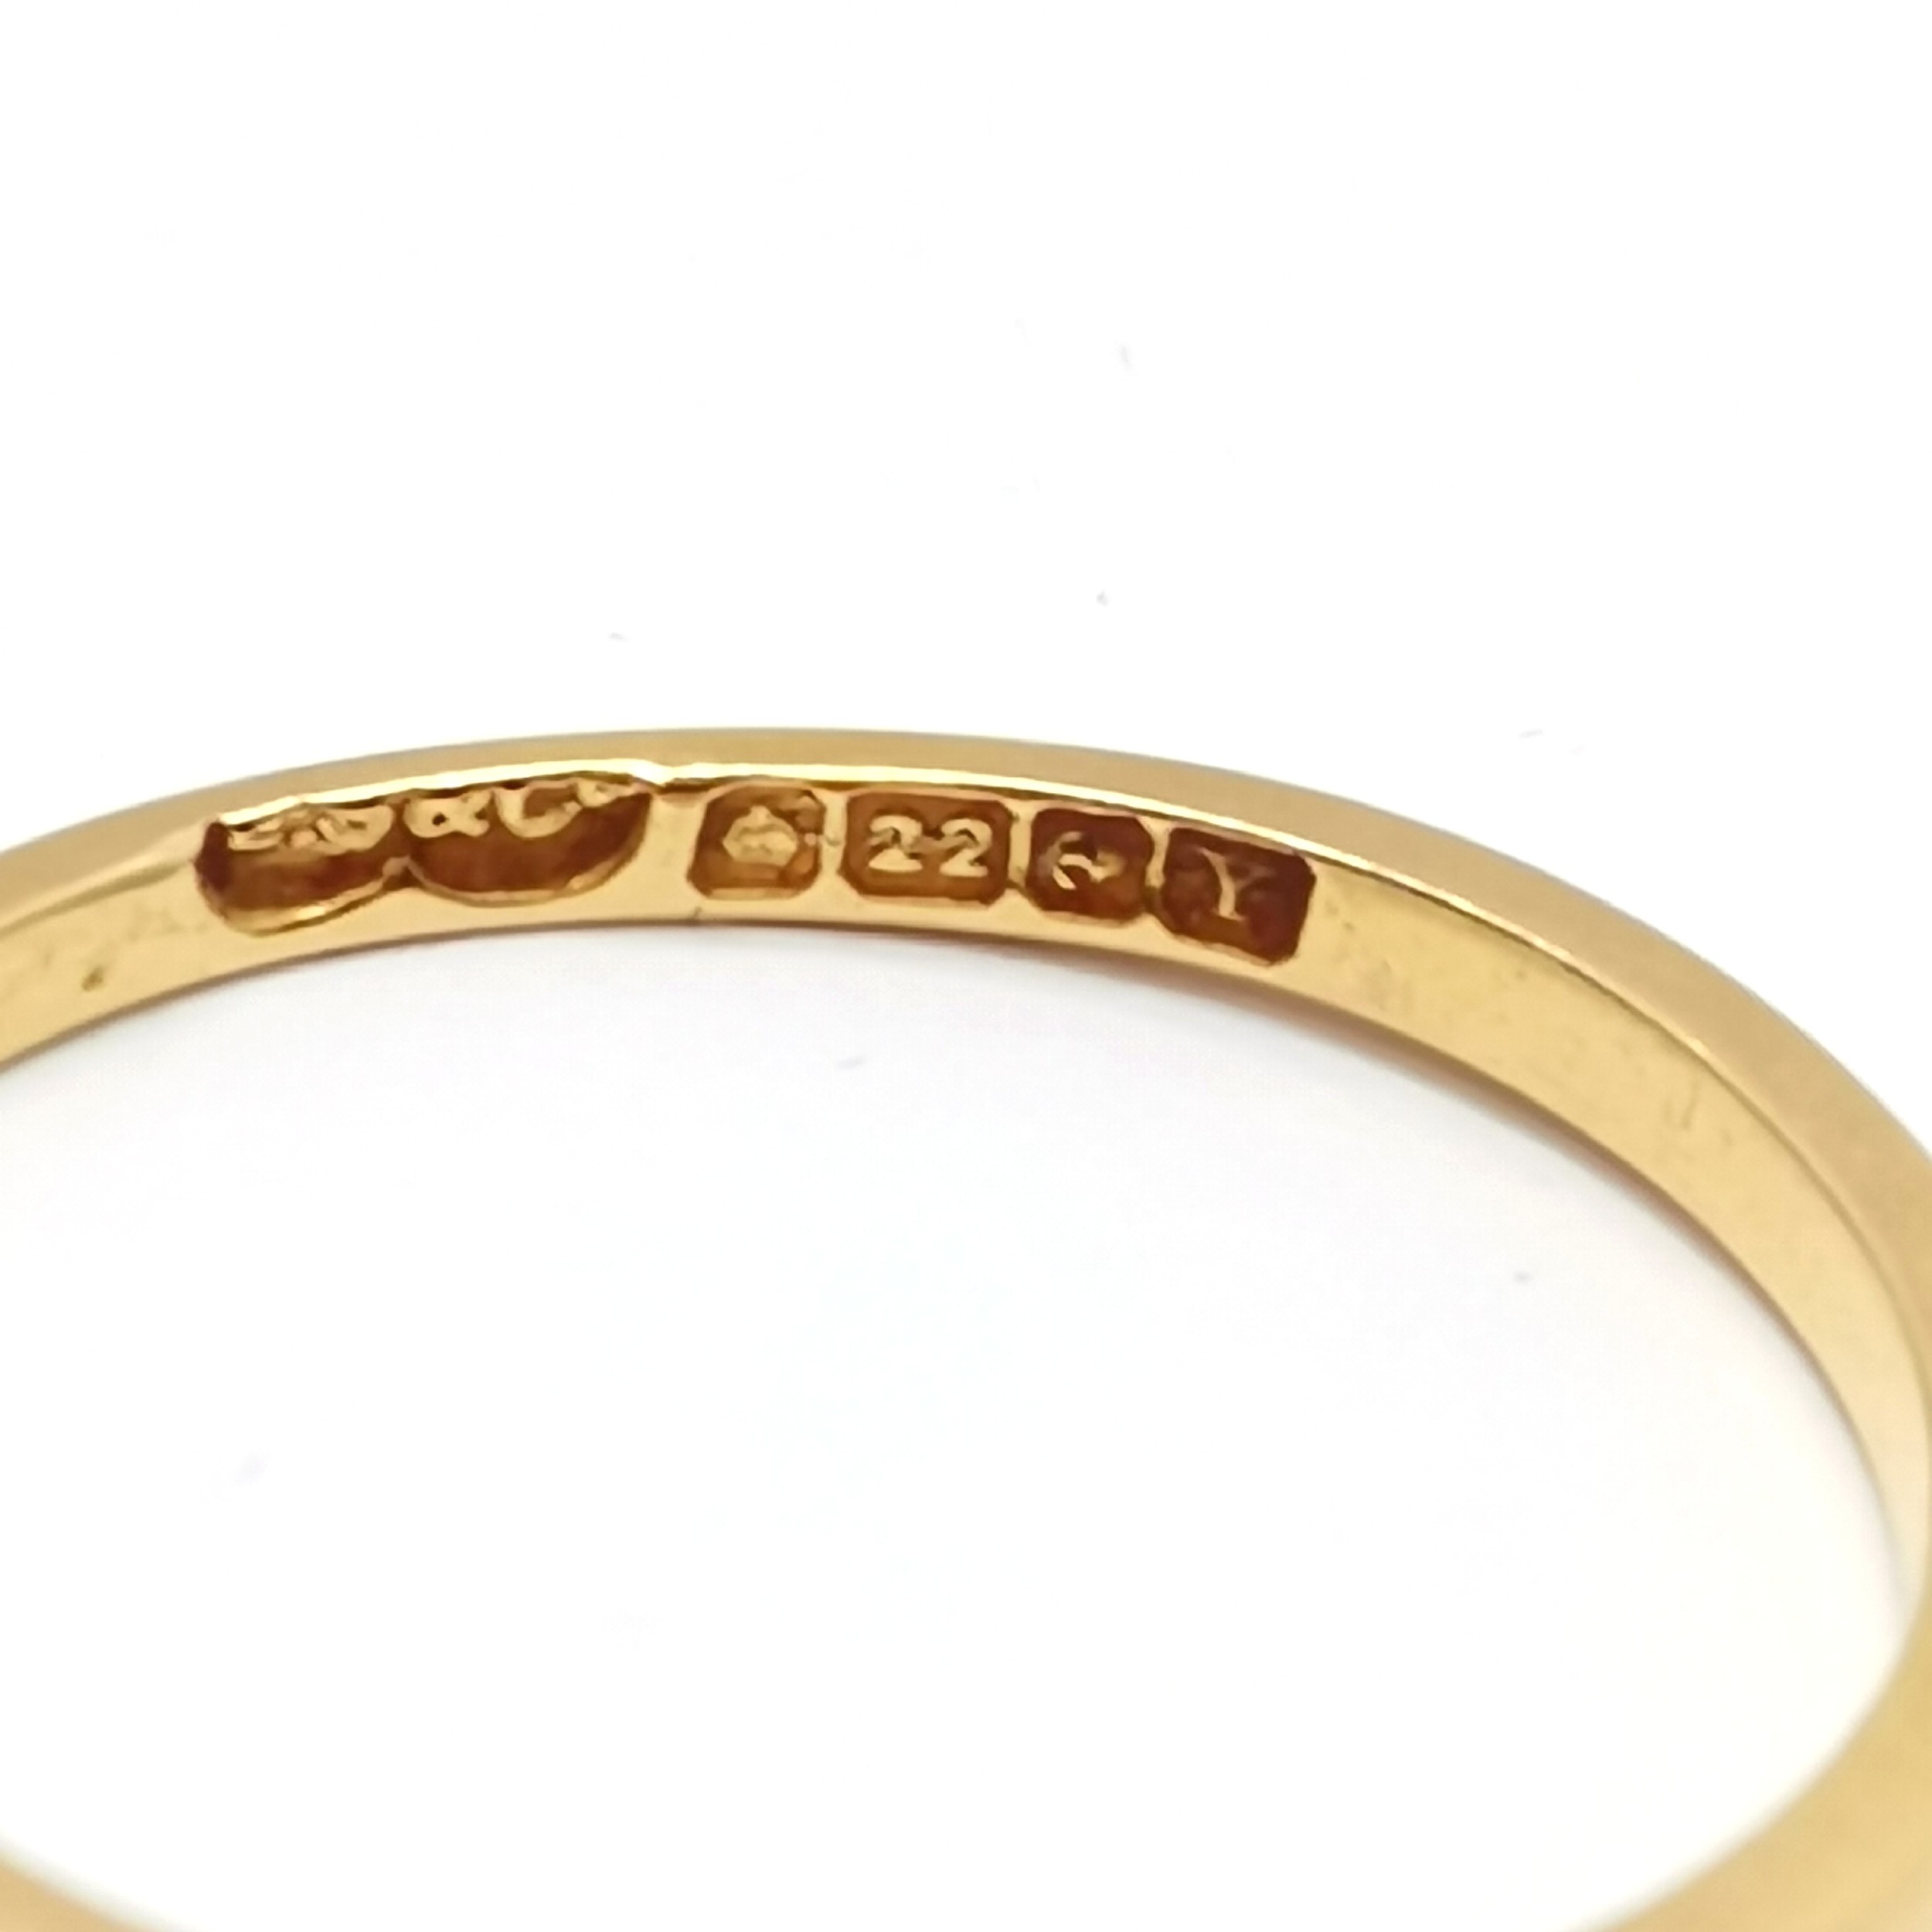 22ct hallmarked gold band ring - size P & 1.9g - Image 3 of 3